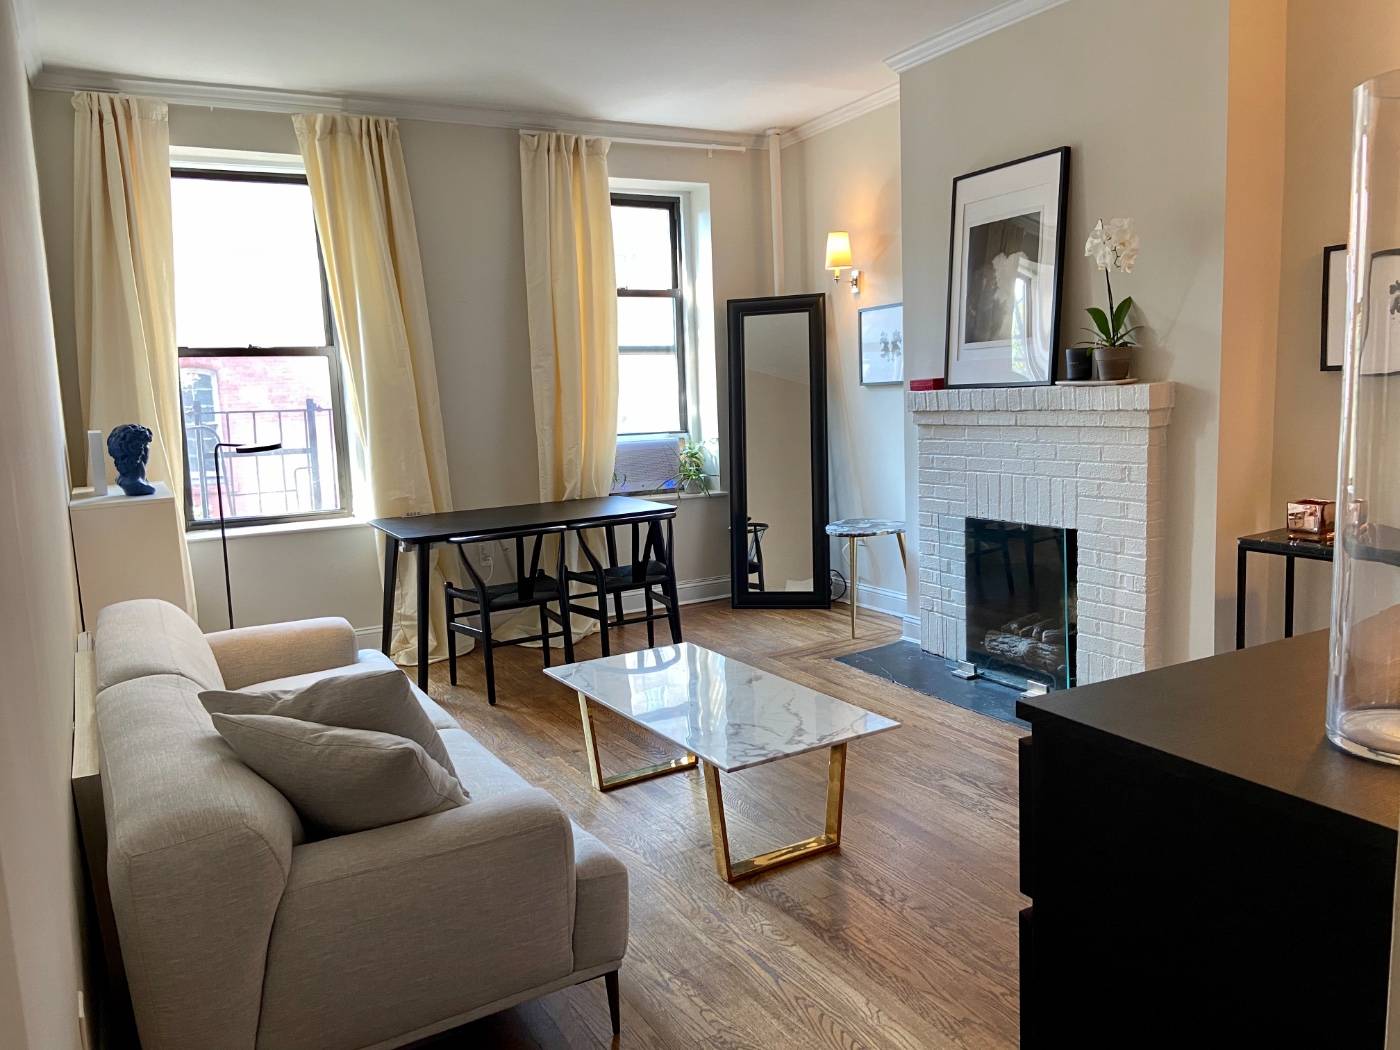 West 10th Street Waverly Place Please contact me for this and other listings in West Village, Chelsea, Soho, Upper East Side, Upper West Side, Midtown East amp ; Midtown West ...